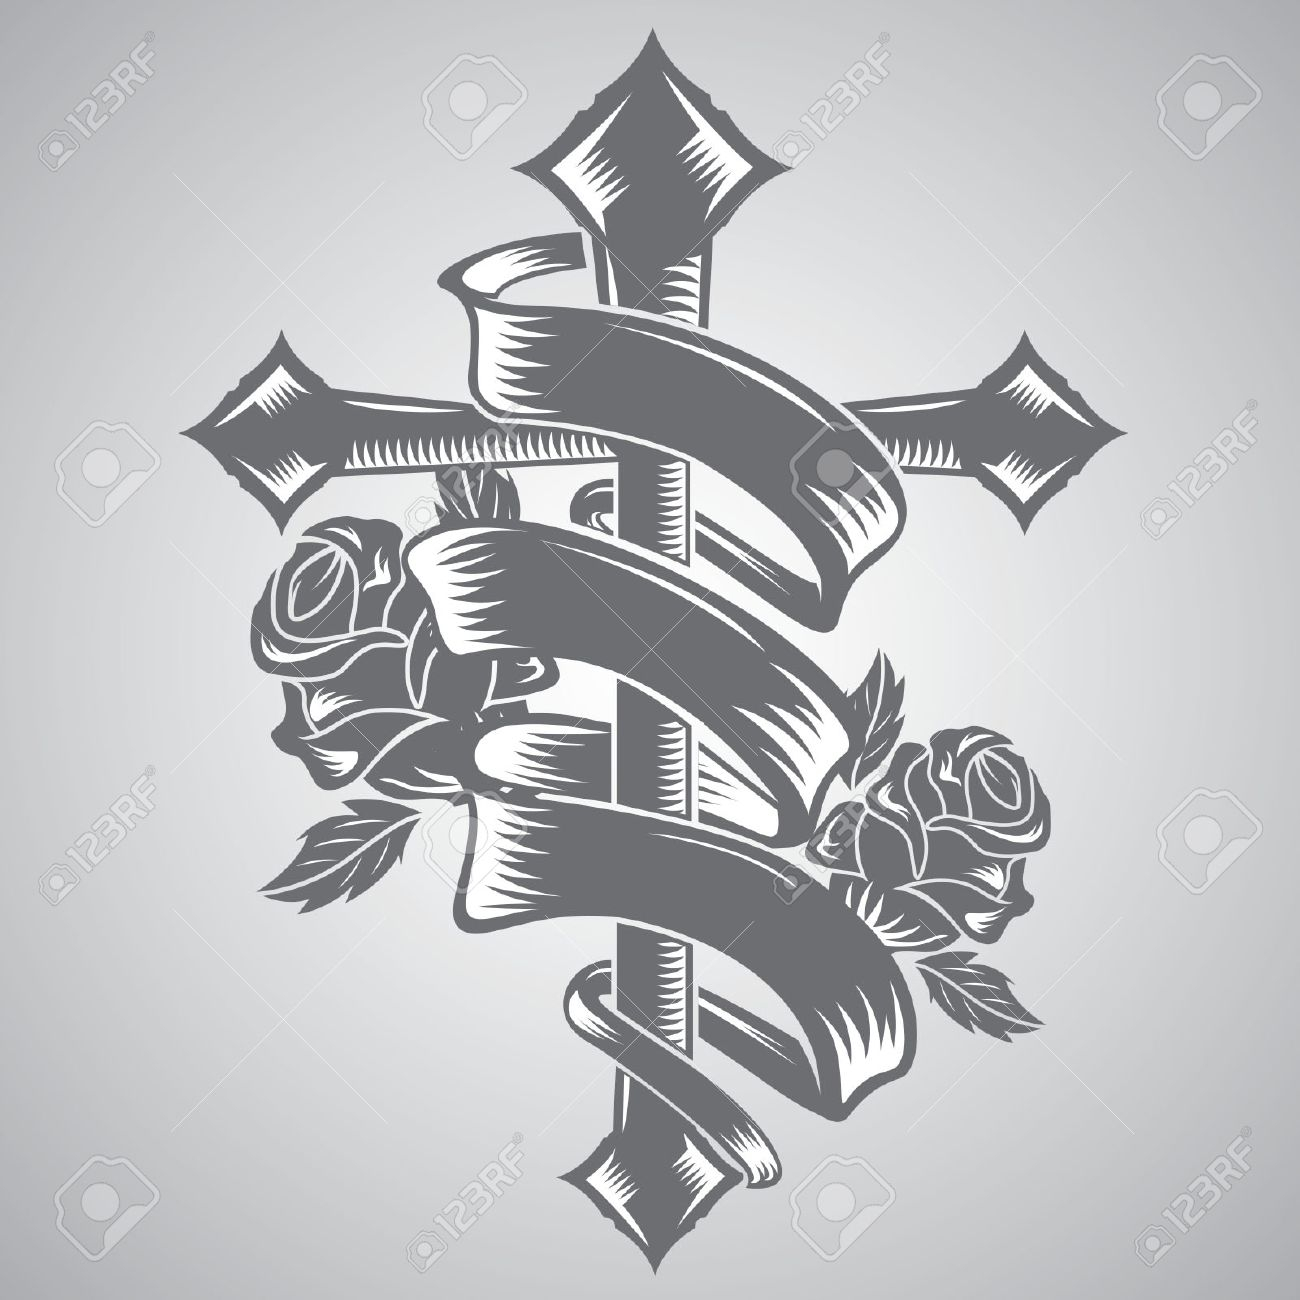 Cross With Ribbon Tattoo Vector Royalty Free Cliparts Vectors And with dimensions 1300 X 1300